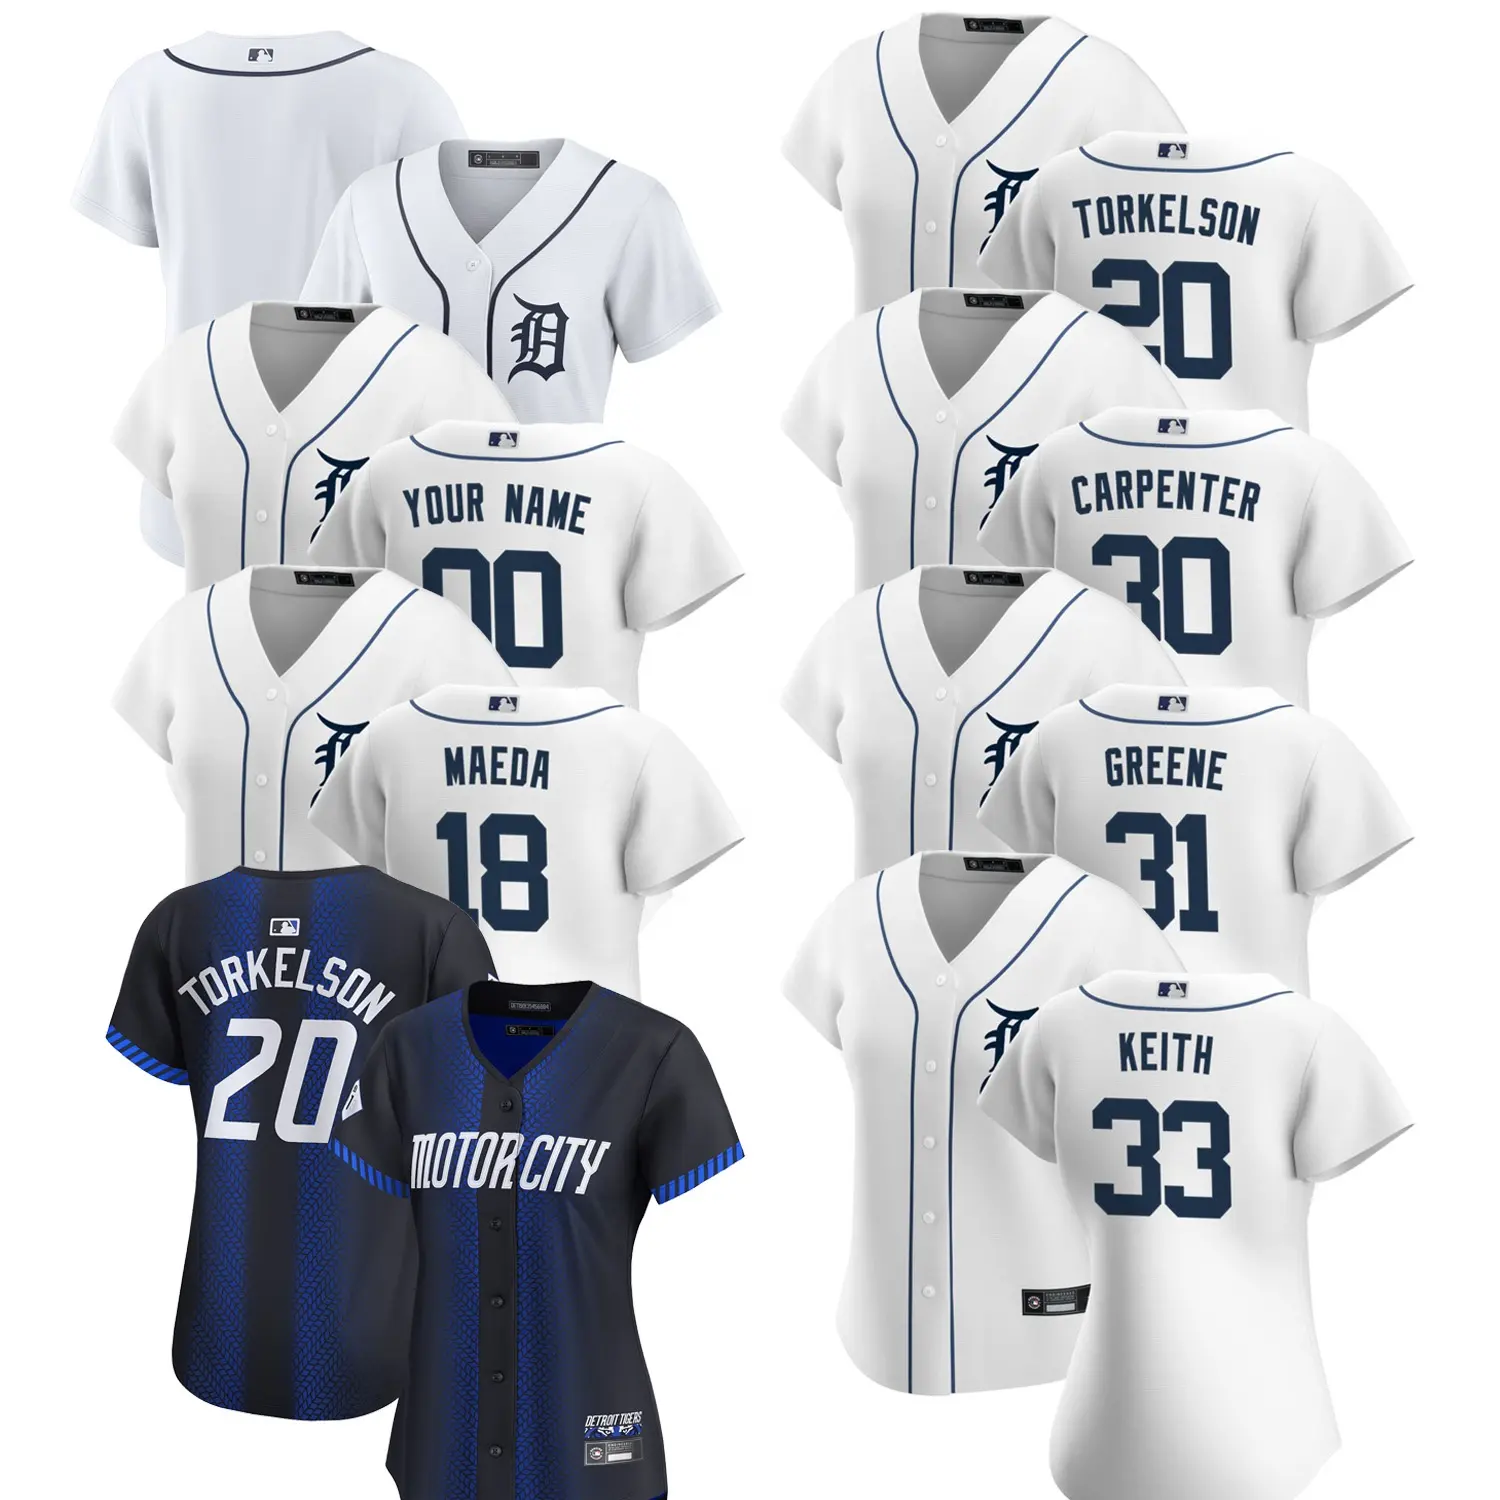 2024 Women's Detroit Tigers Home Jersey White Baseball Shirts Custom Uniform Embroidered Stitched Blank #18 #20 #30 #31 #33